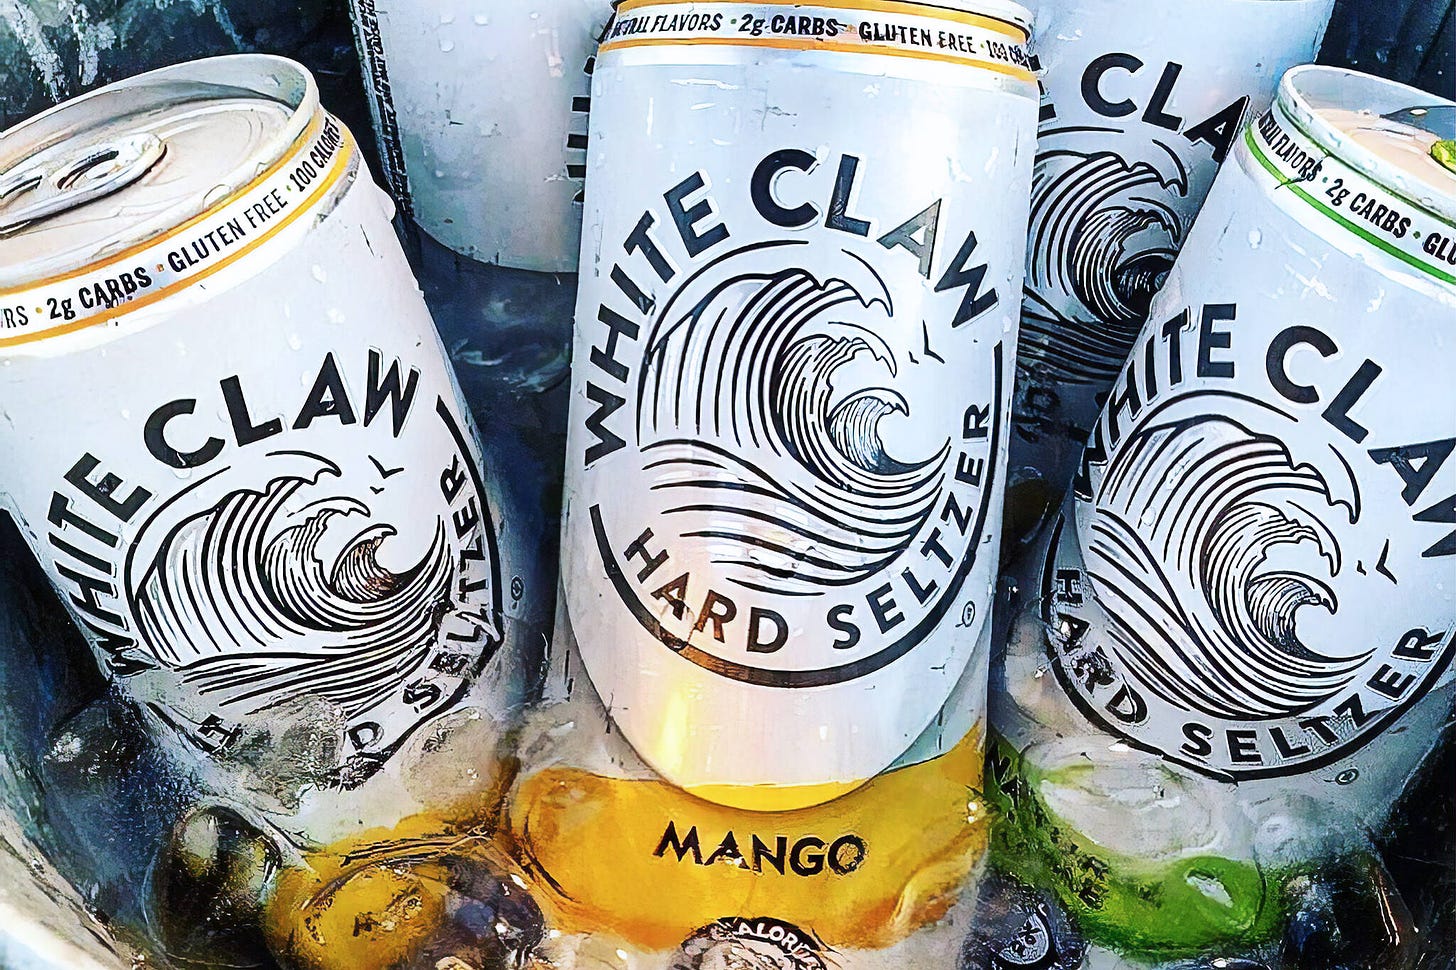 White Claw is officially coming to Canada